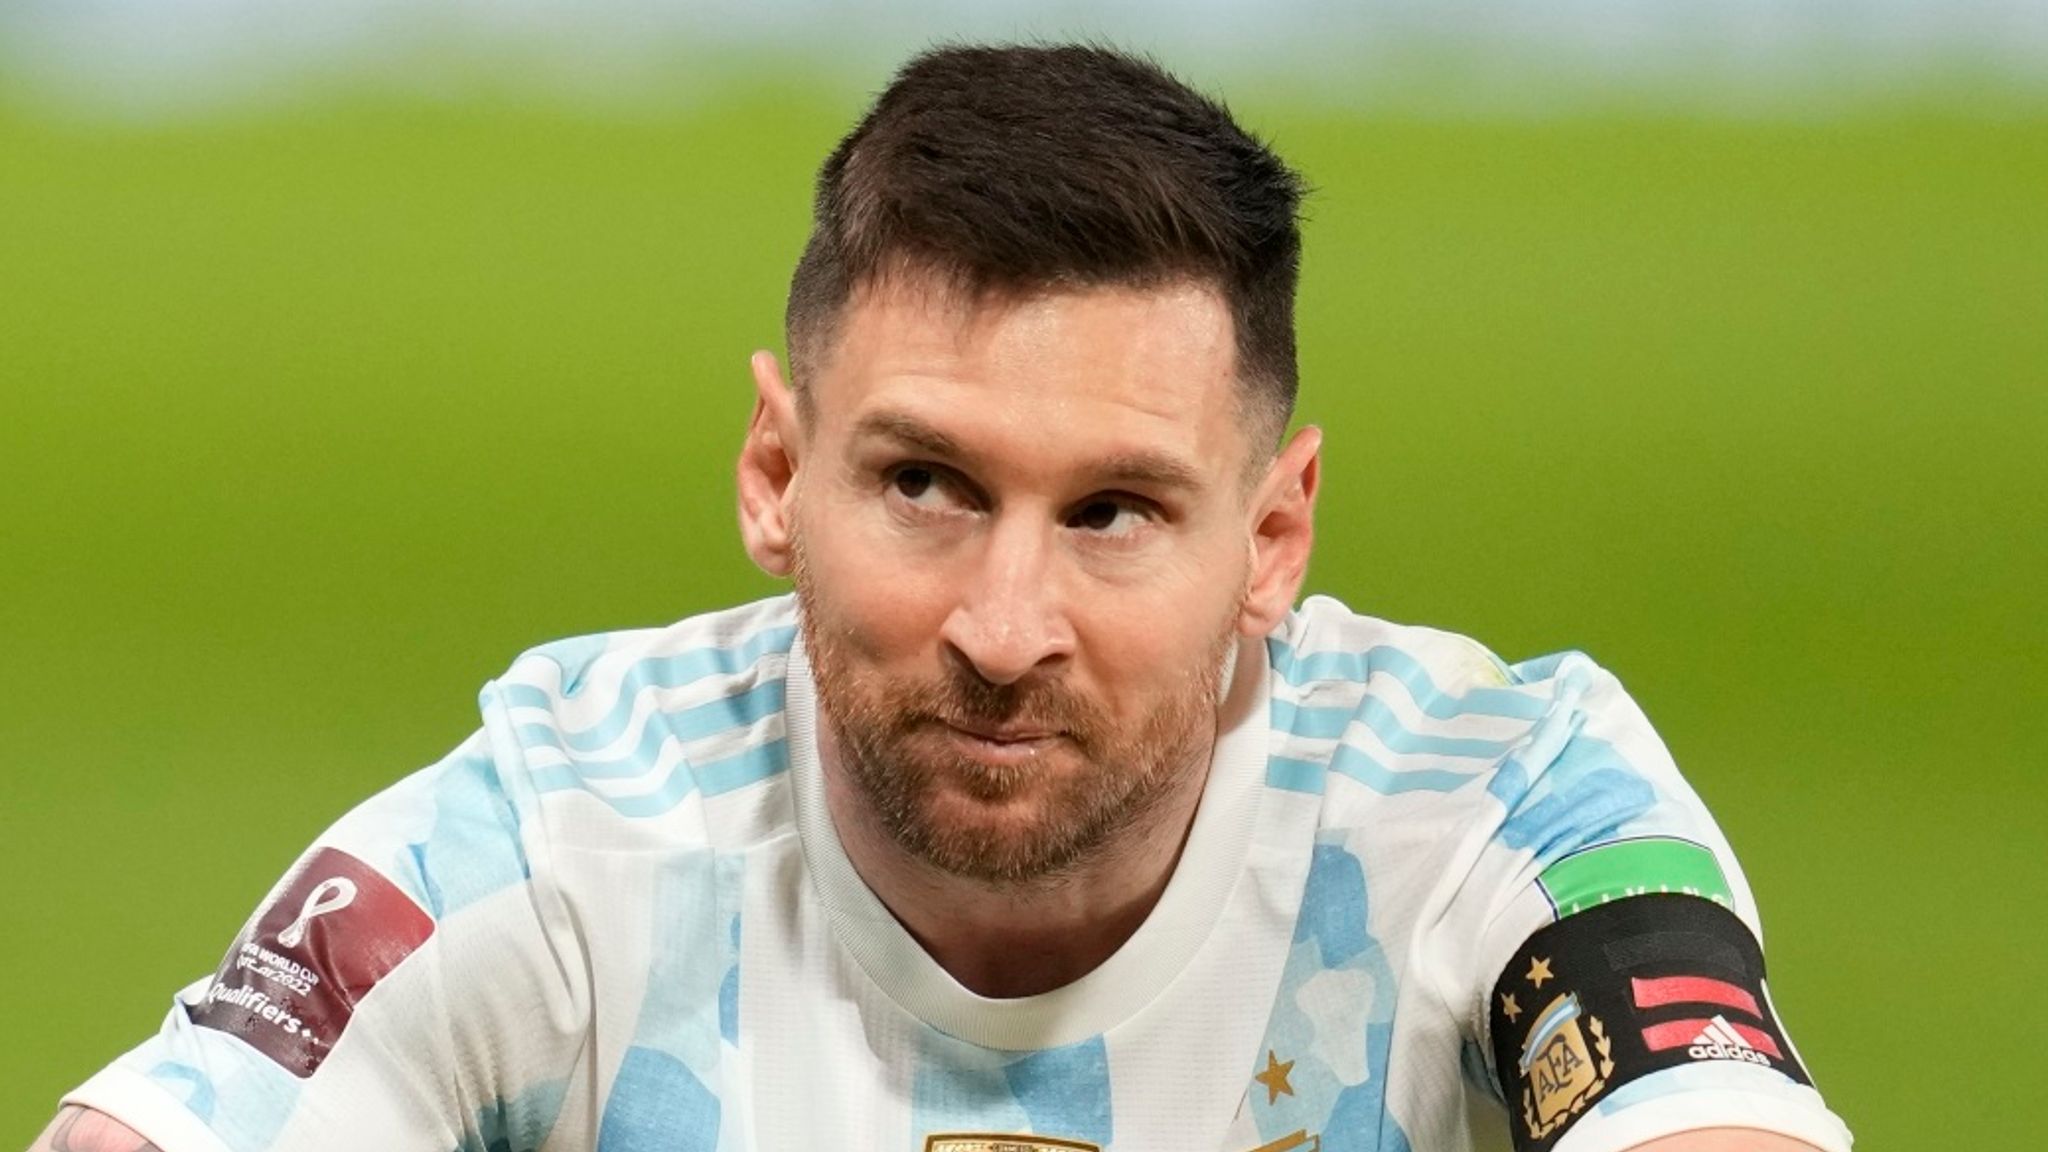 messi argentina jersey 2022 world cup